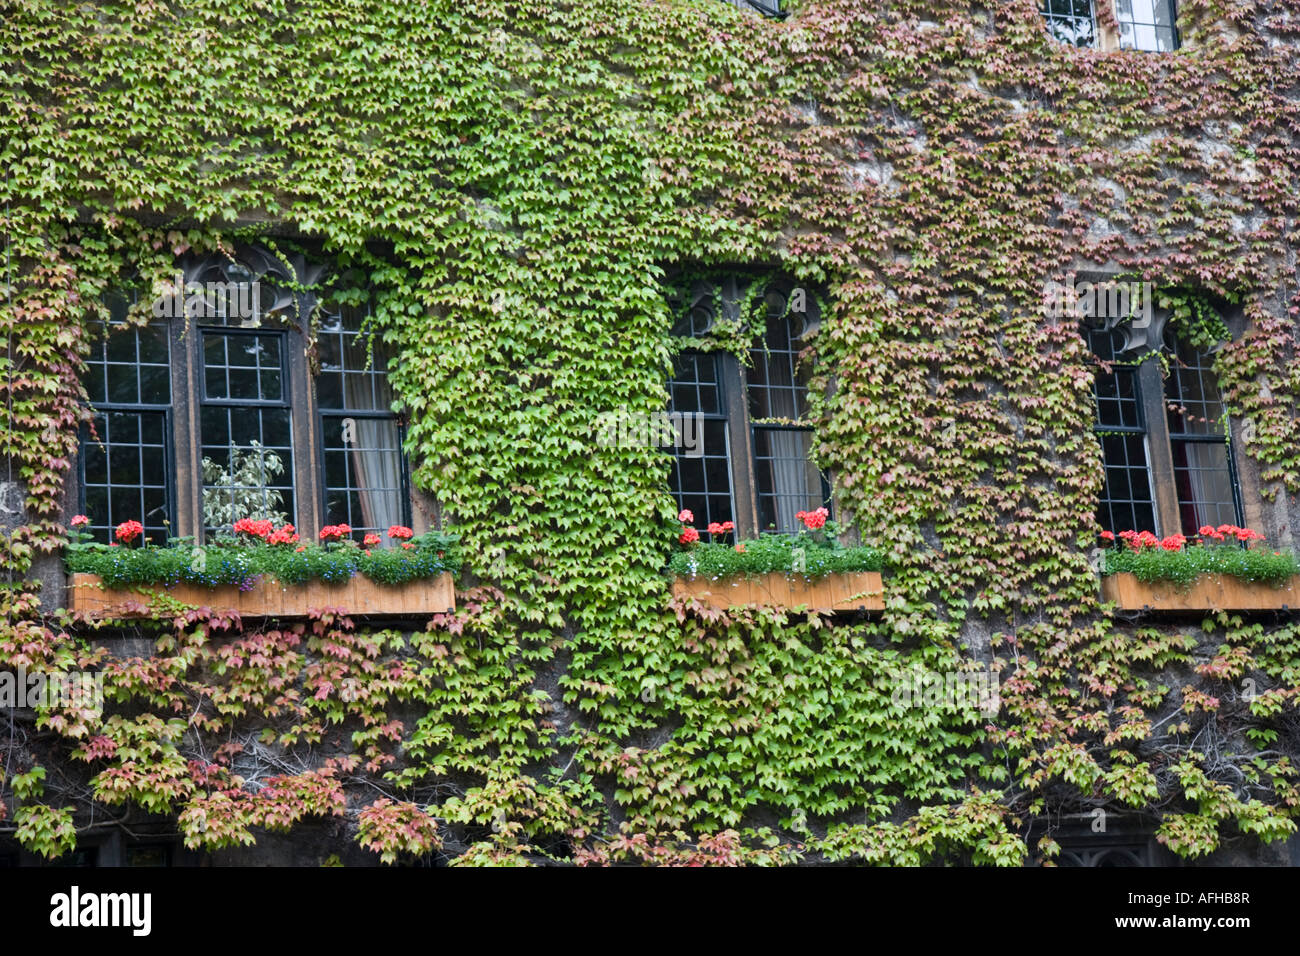 Ivy covering walls around 3 windows tipically found in England UK Stock Photo